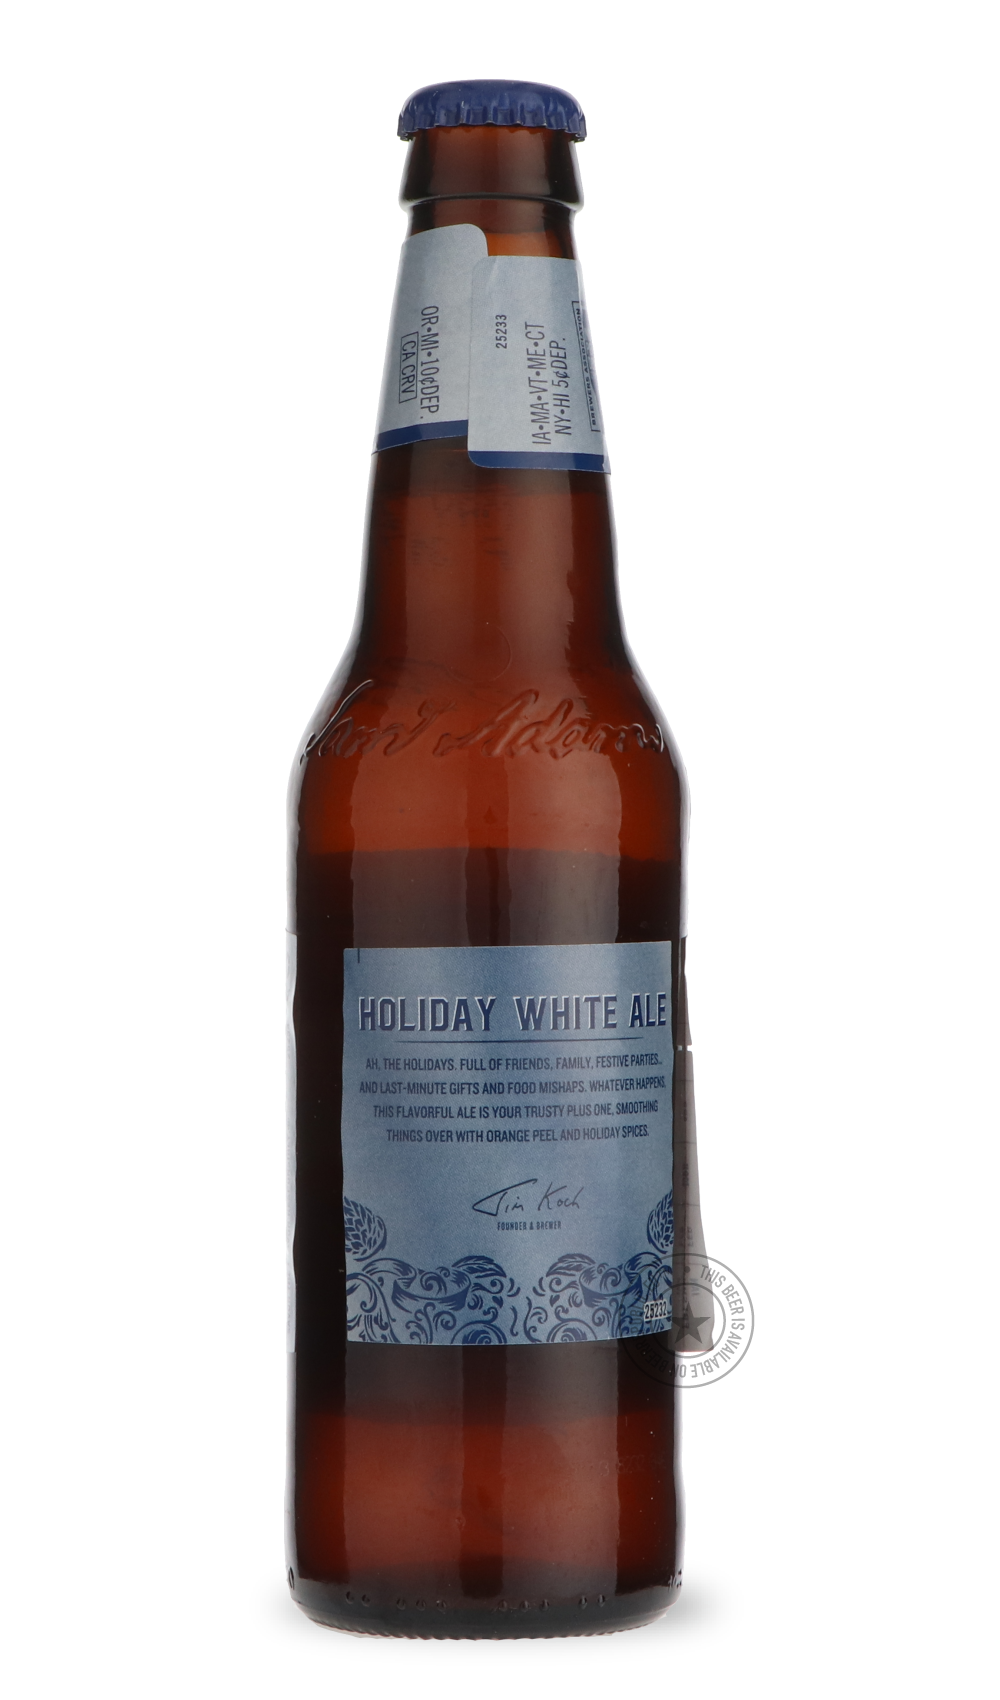 -Samuel Adams- Holiday White Ale-Pale- Only @ Beer Republic - The best online beer store for American & Canadian craft beer - Buy beer online from the USA and Canada - Bier online kopen - Amerikaans bier kopen - Craft beer store - Craft beer kopen - Amerikanisch bier kaufen - Bier online kaufen - Acheter biere online - IPA - Stout - Porter - New England IPA - Hazy IPA - Imperial Stout - Barrel Aged - Barrel Aged Imperial Stout - Brown - Dark beer - Blond - Blonde - Pilsner - Lager - Wheat - Weizen - Amber -